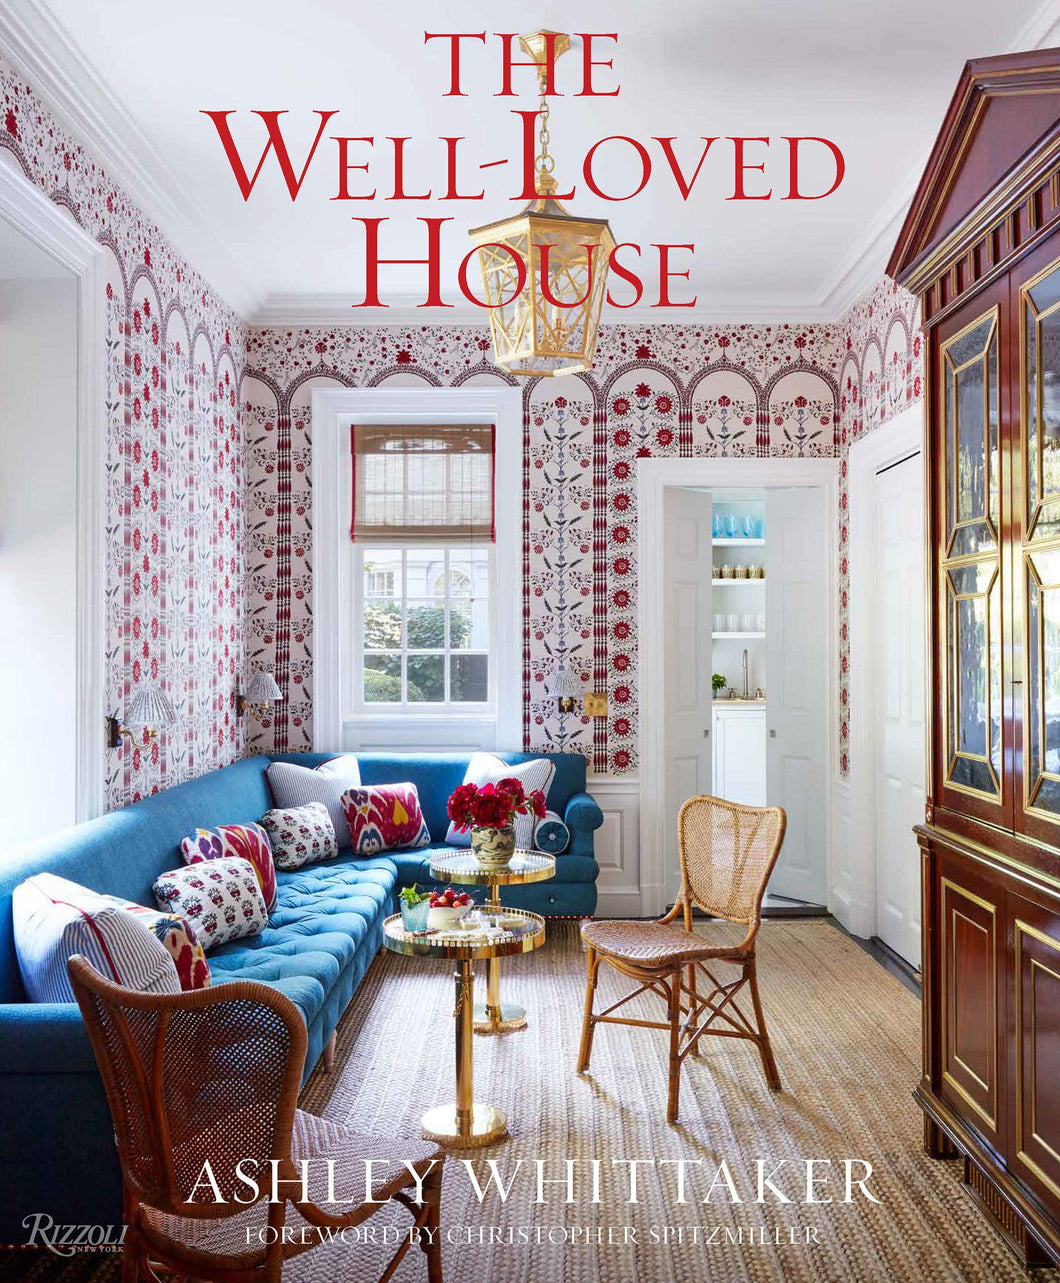 The Well Loved House by Ashley Whittaker